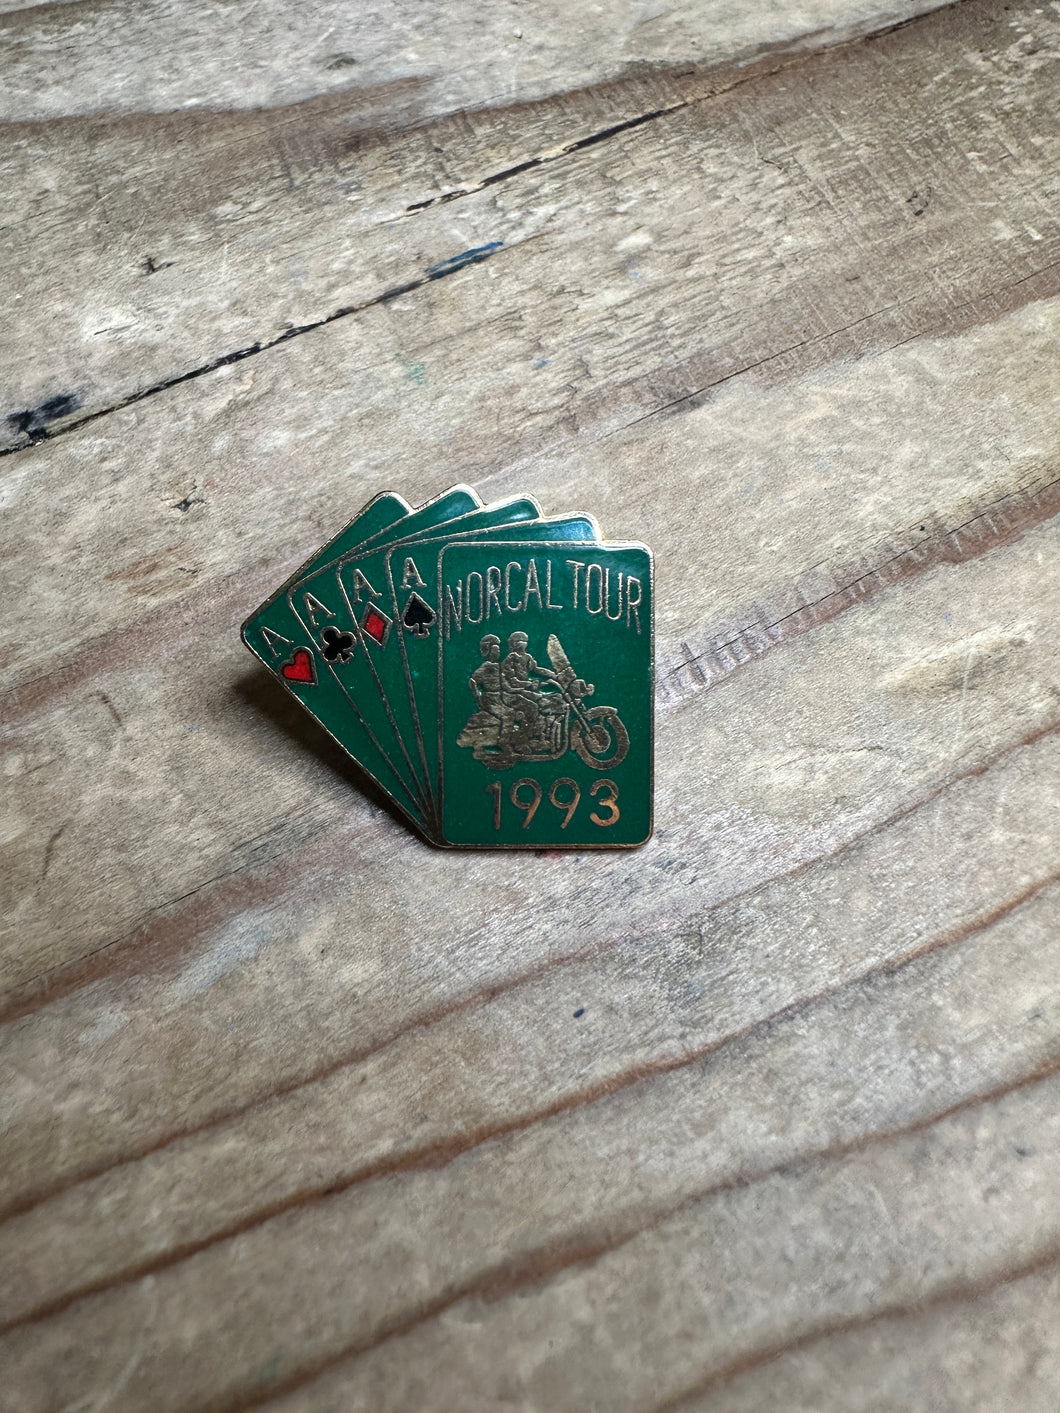 Nor Cal Motorcycle Tour Pin, 4 of a Kind, 1993 Vintage